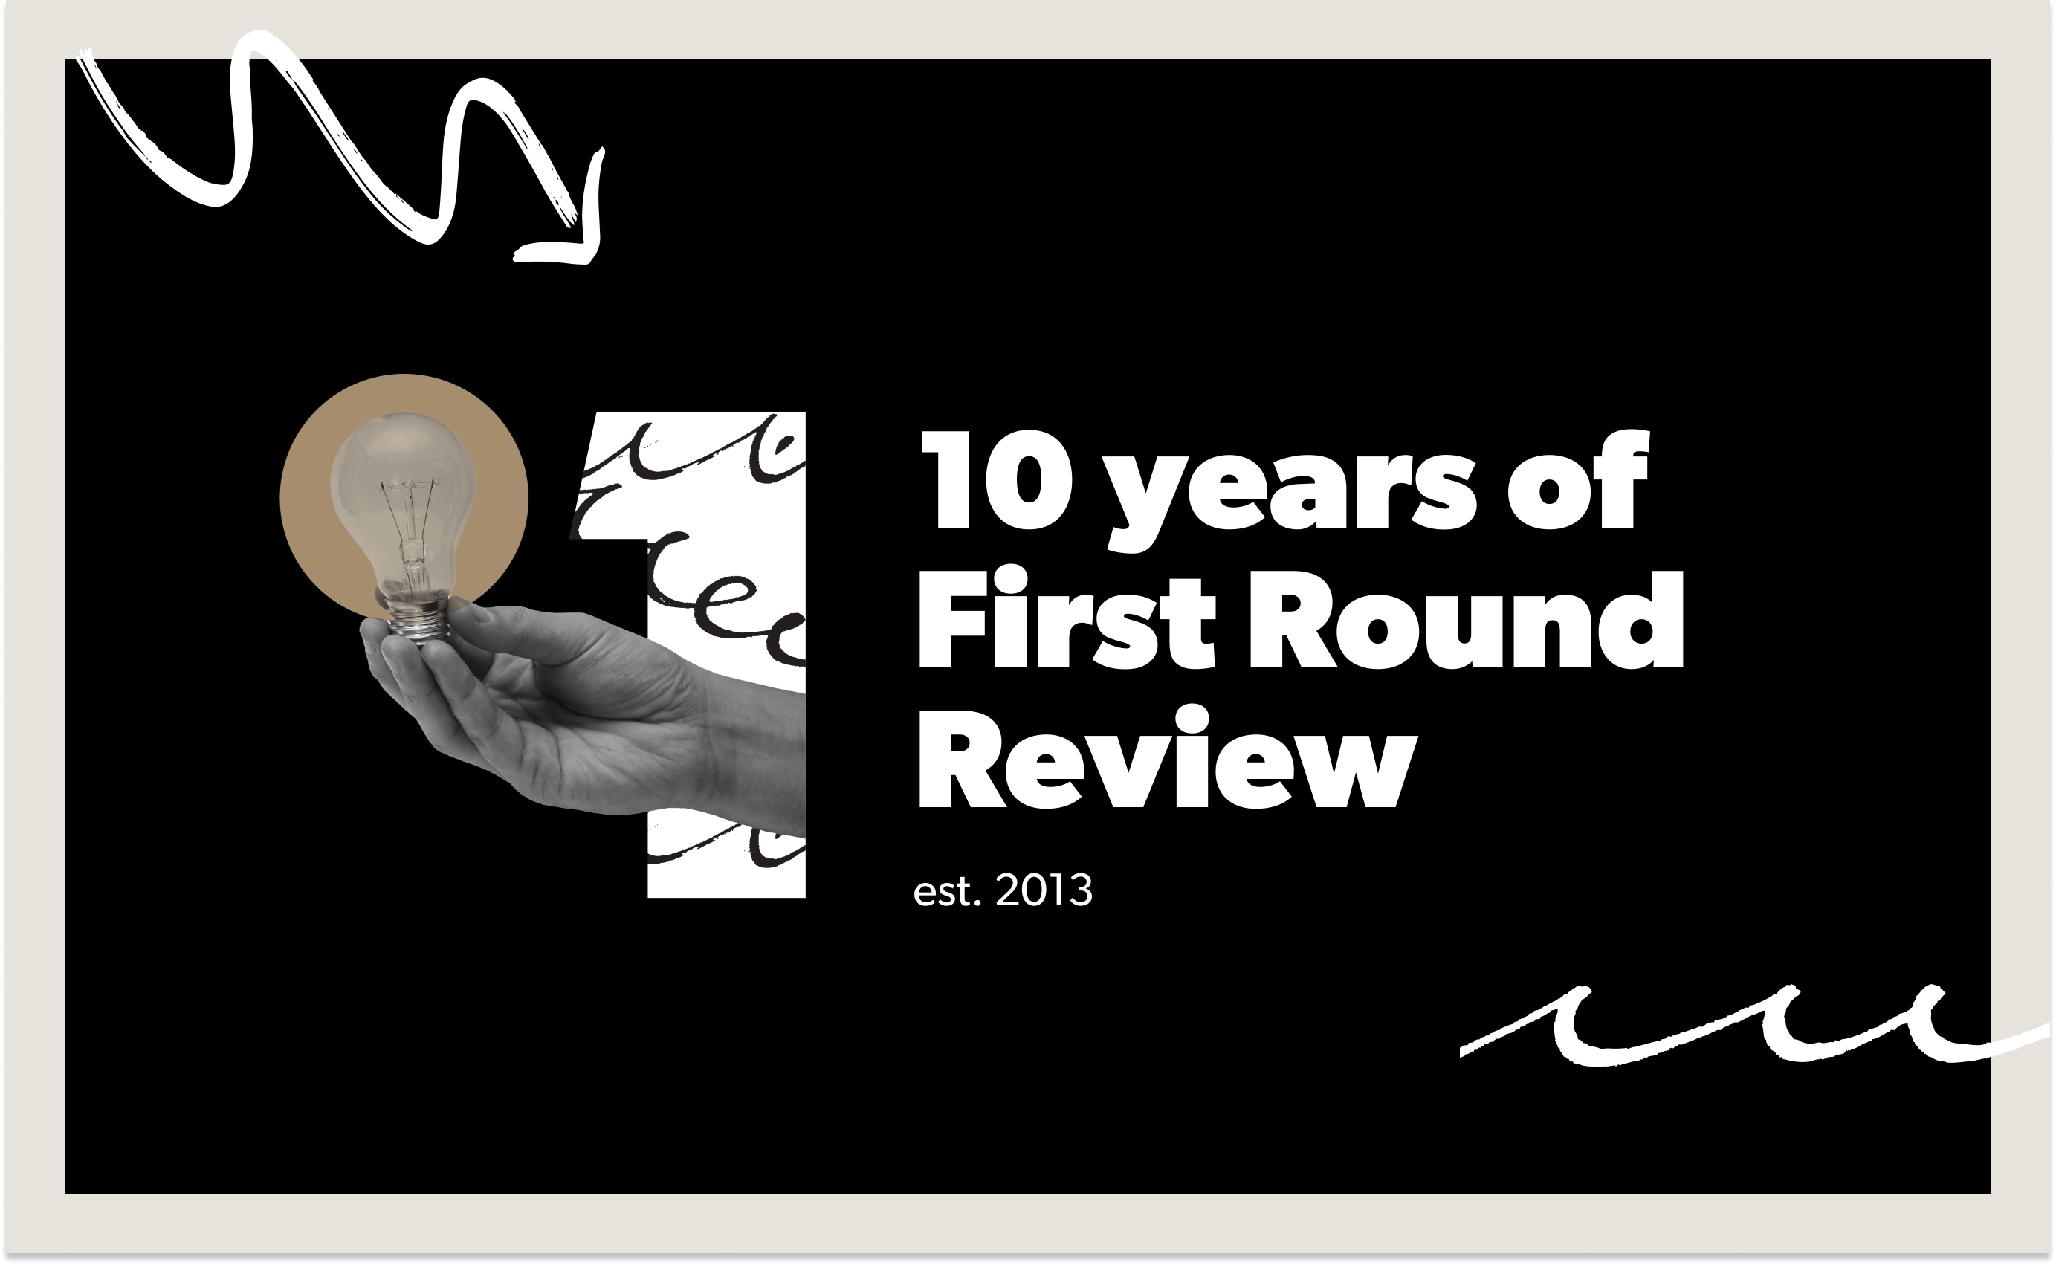 10 years of advice on First Round Review